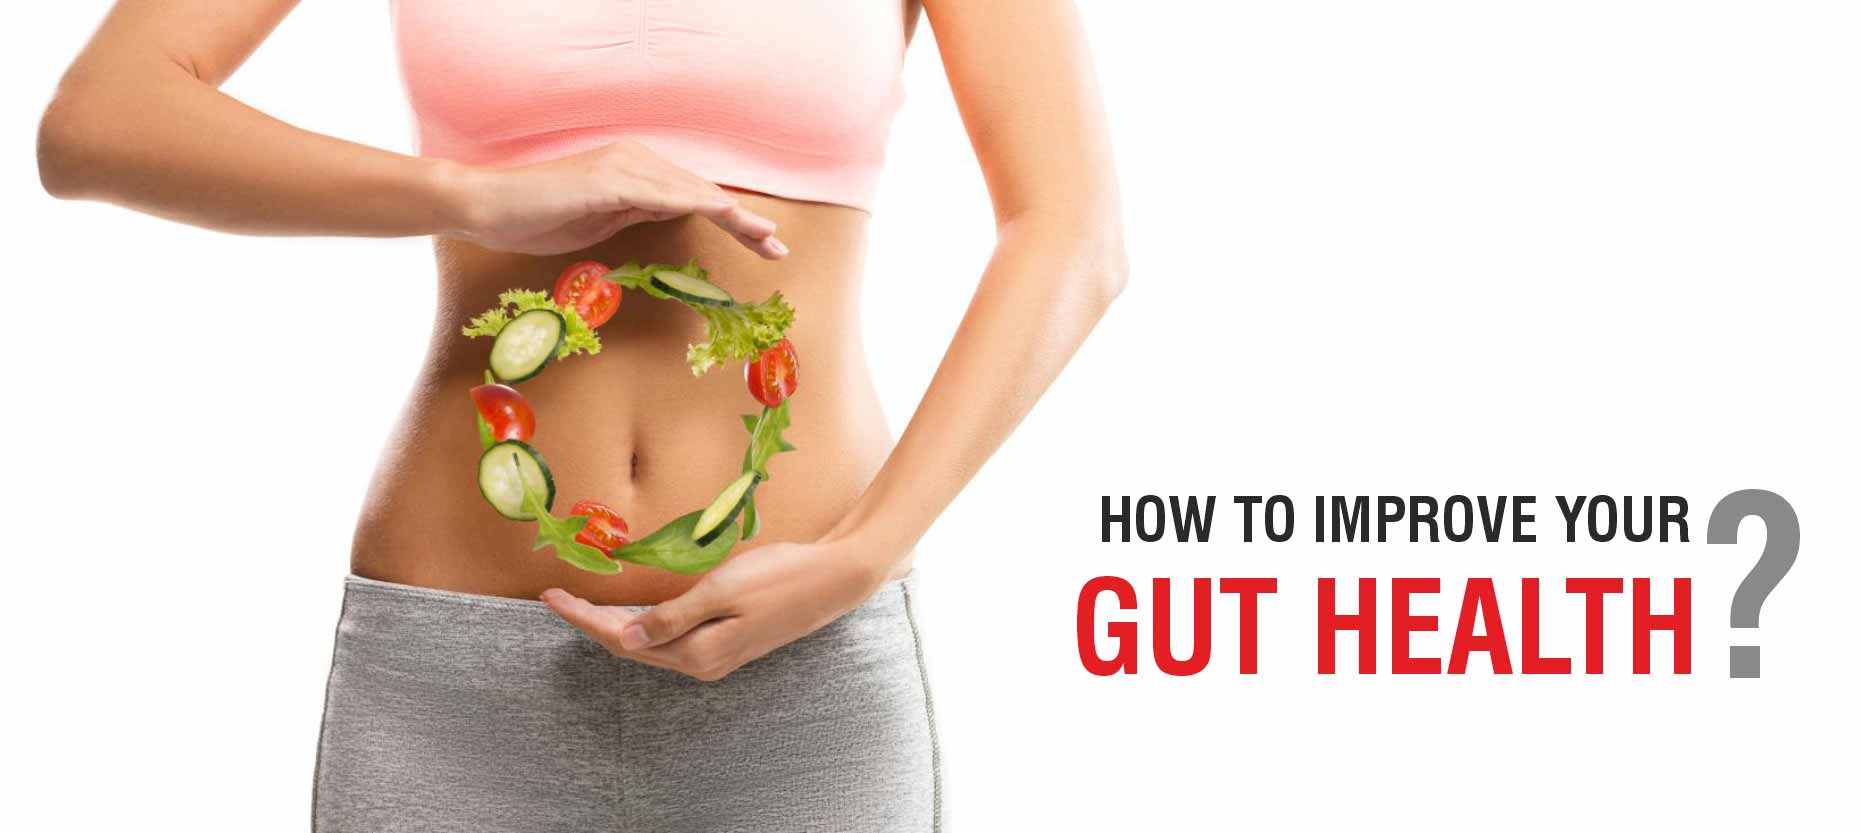 How To Improve Your Gut Health?